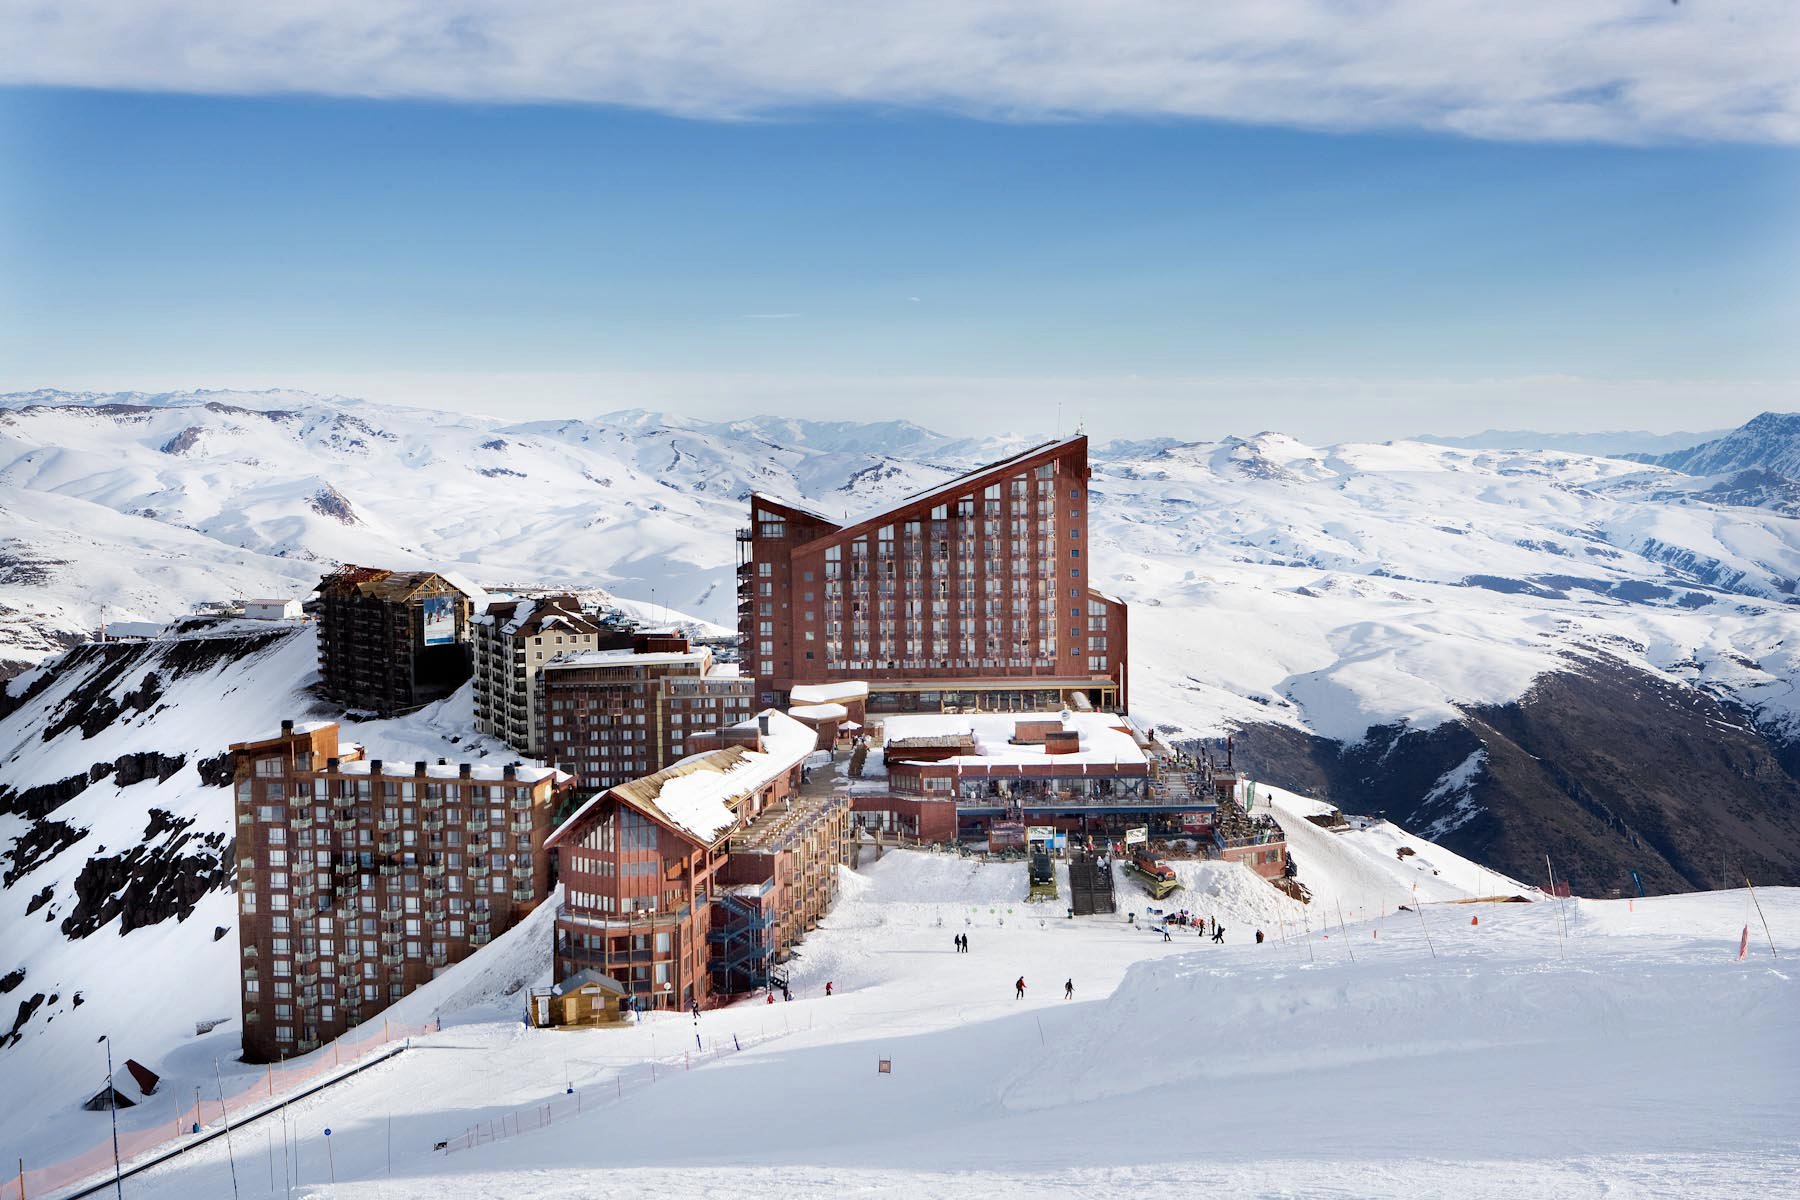 Hope we see Valle Nevado this way in a couple of days!